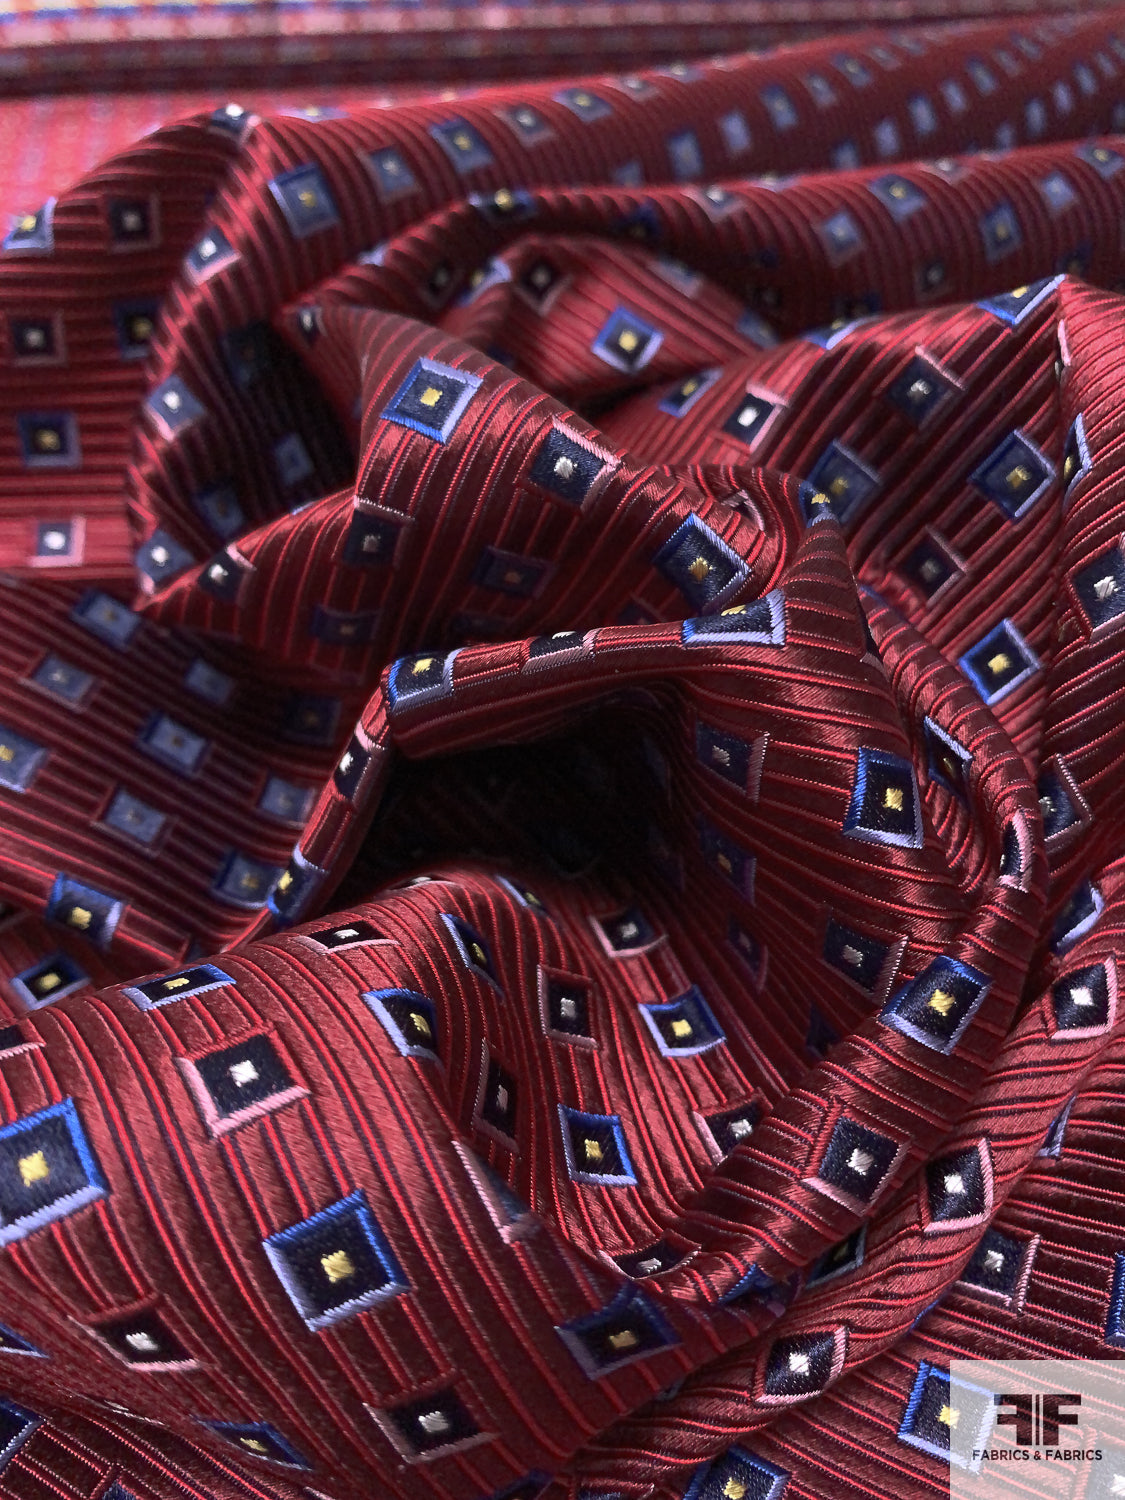 Squares and Diagonal Striped Silk Necktie Jacquard Brocade - Red / Navy / Blues